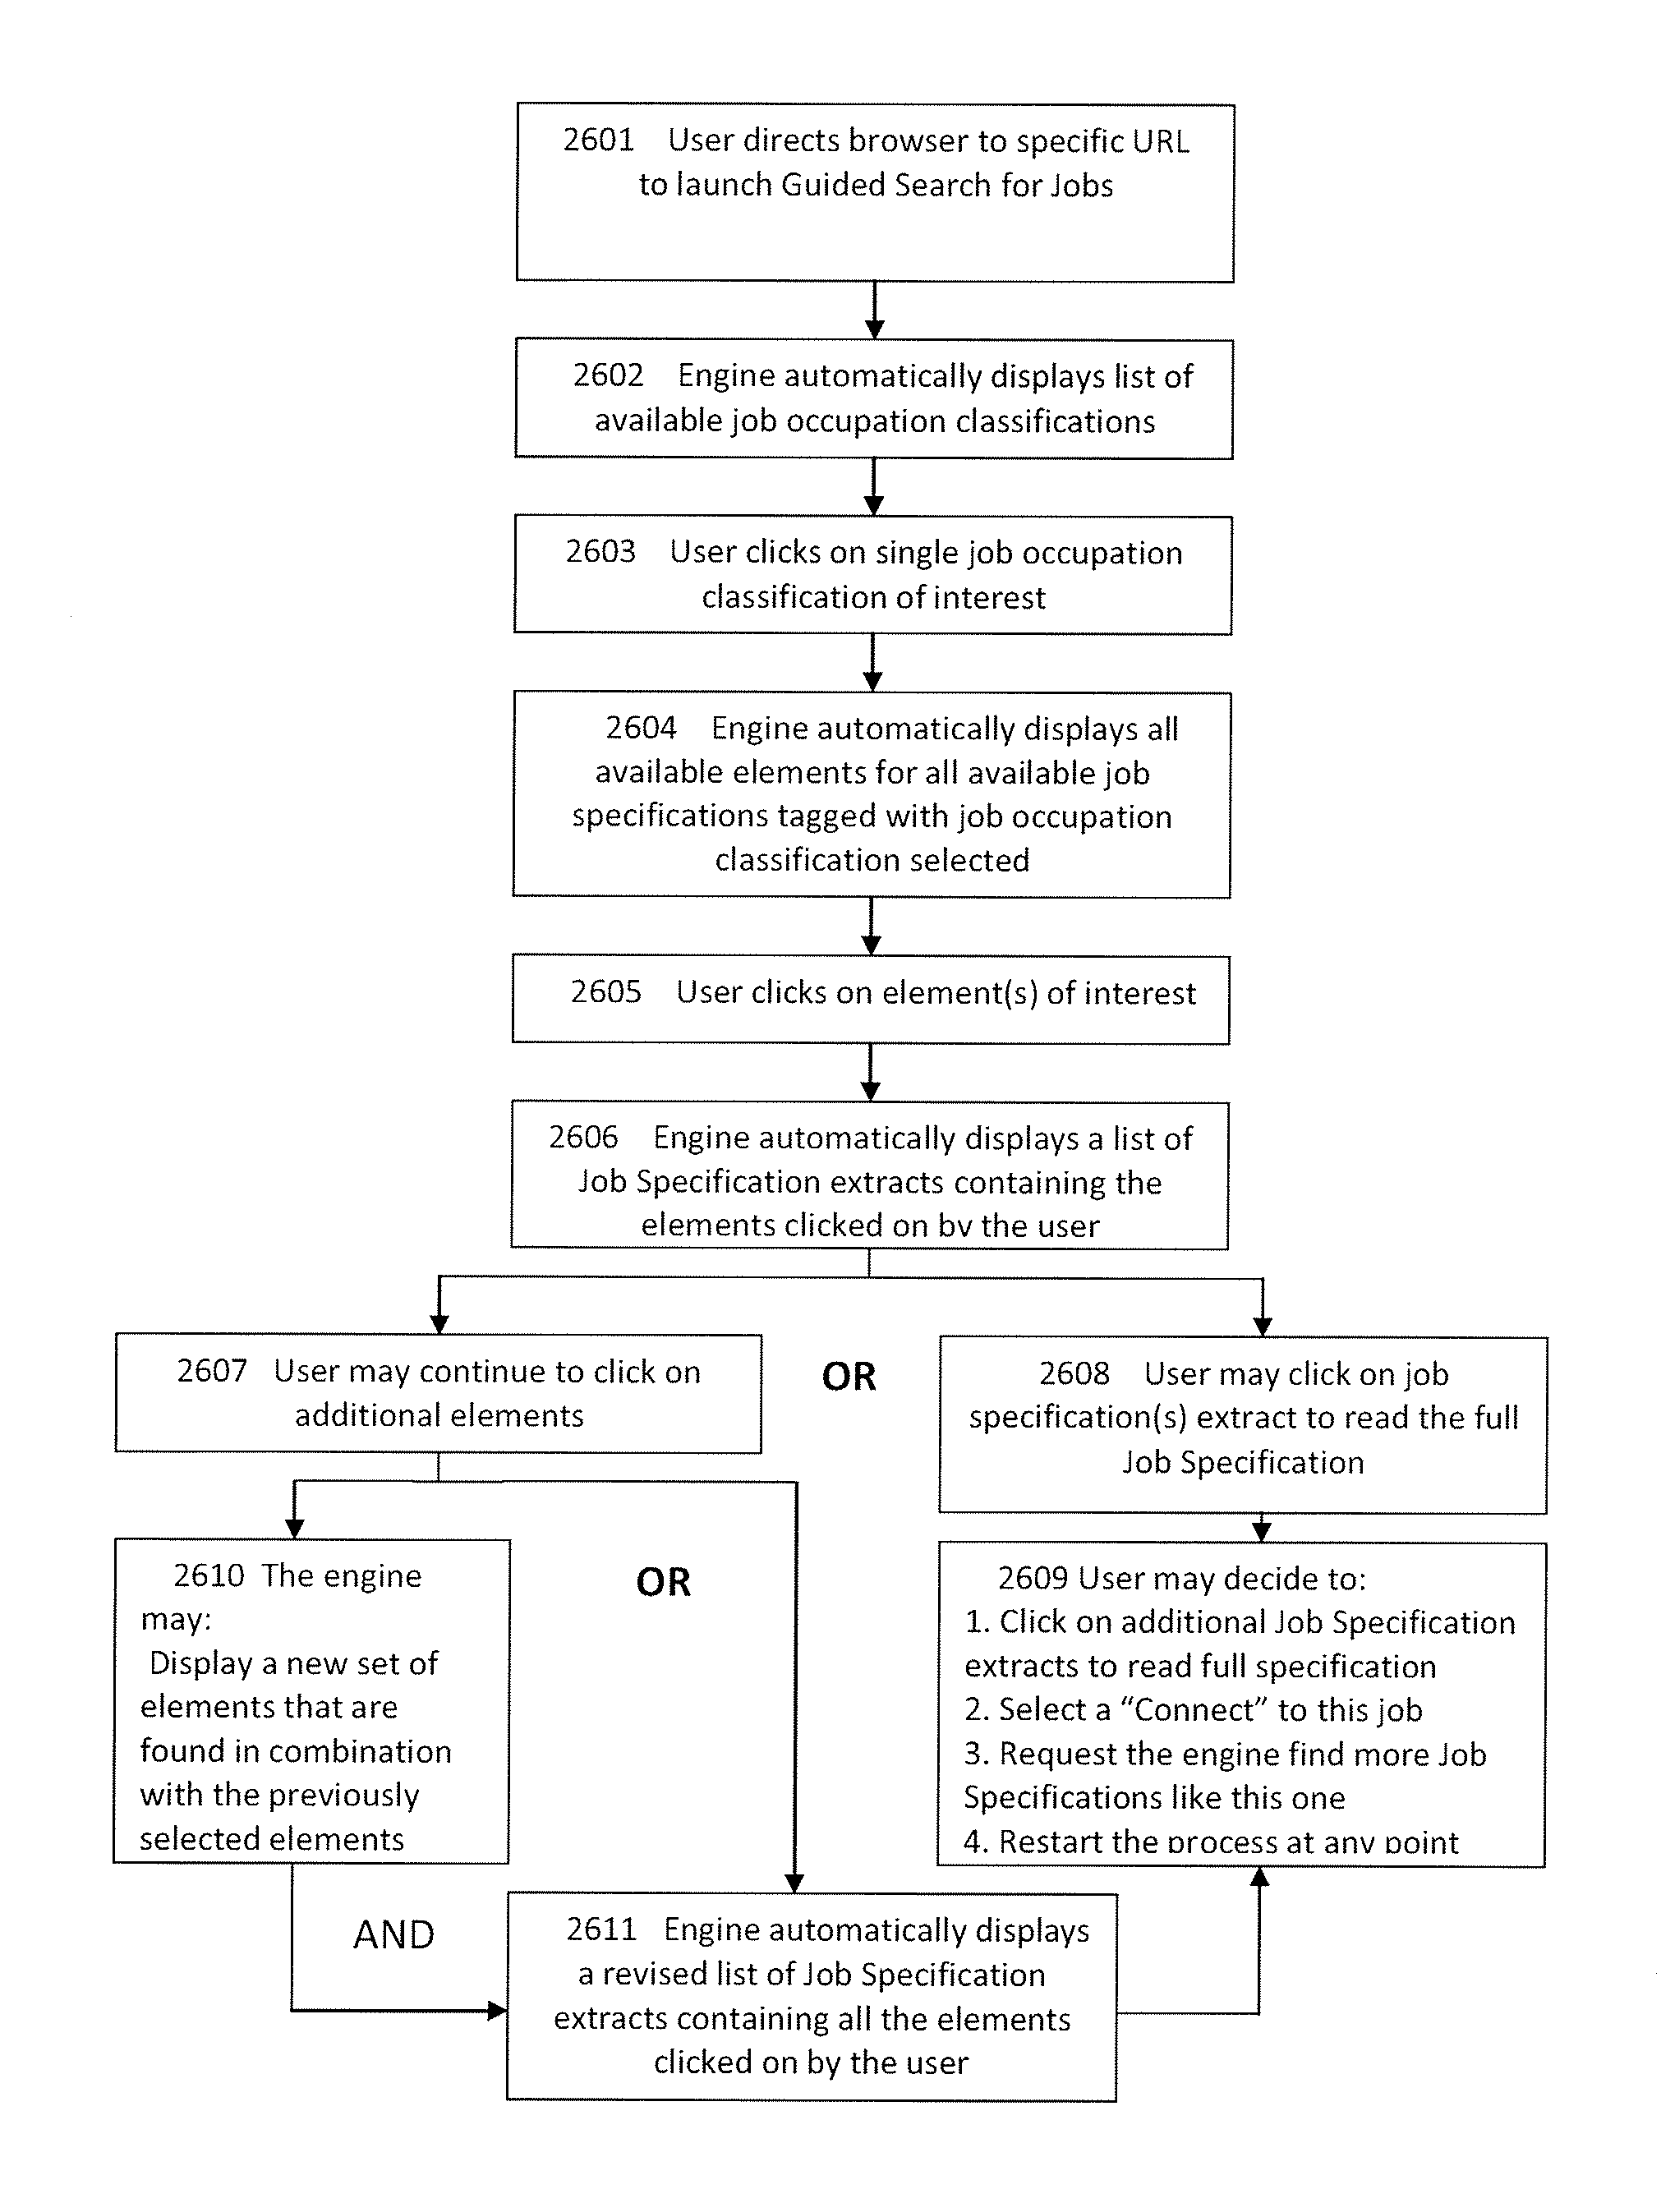 System and method for guiding users to candidate resumes and current in-demand job specification matches using predictive tag clouds of common, normalized elements for navigation